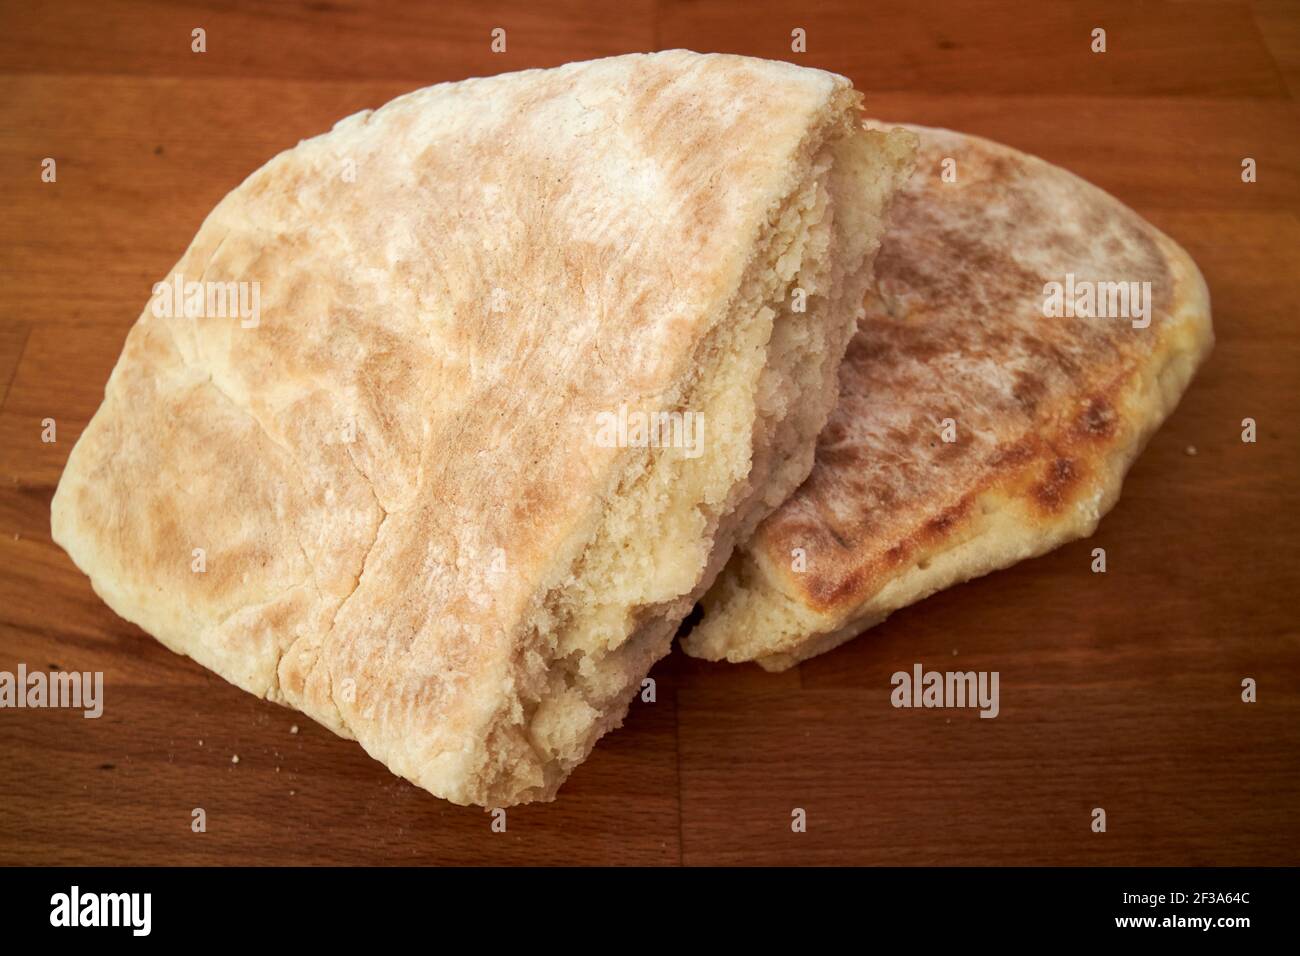 soda farls northern irish bread produced in home bakery by hand Stock Photo